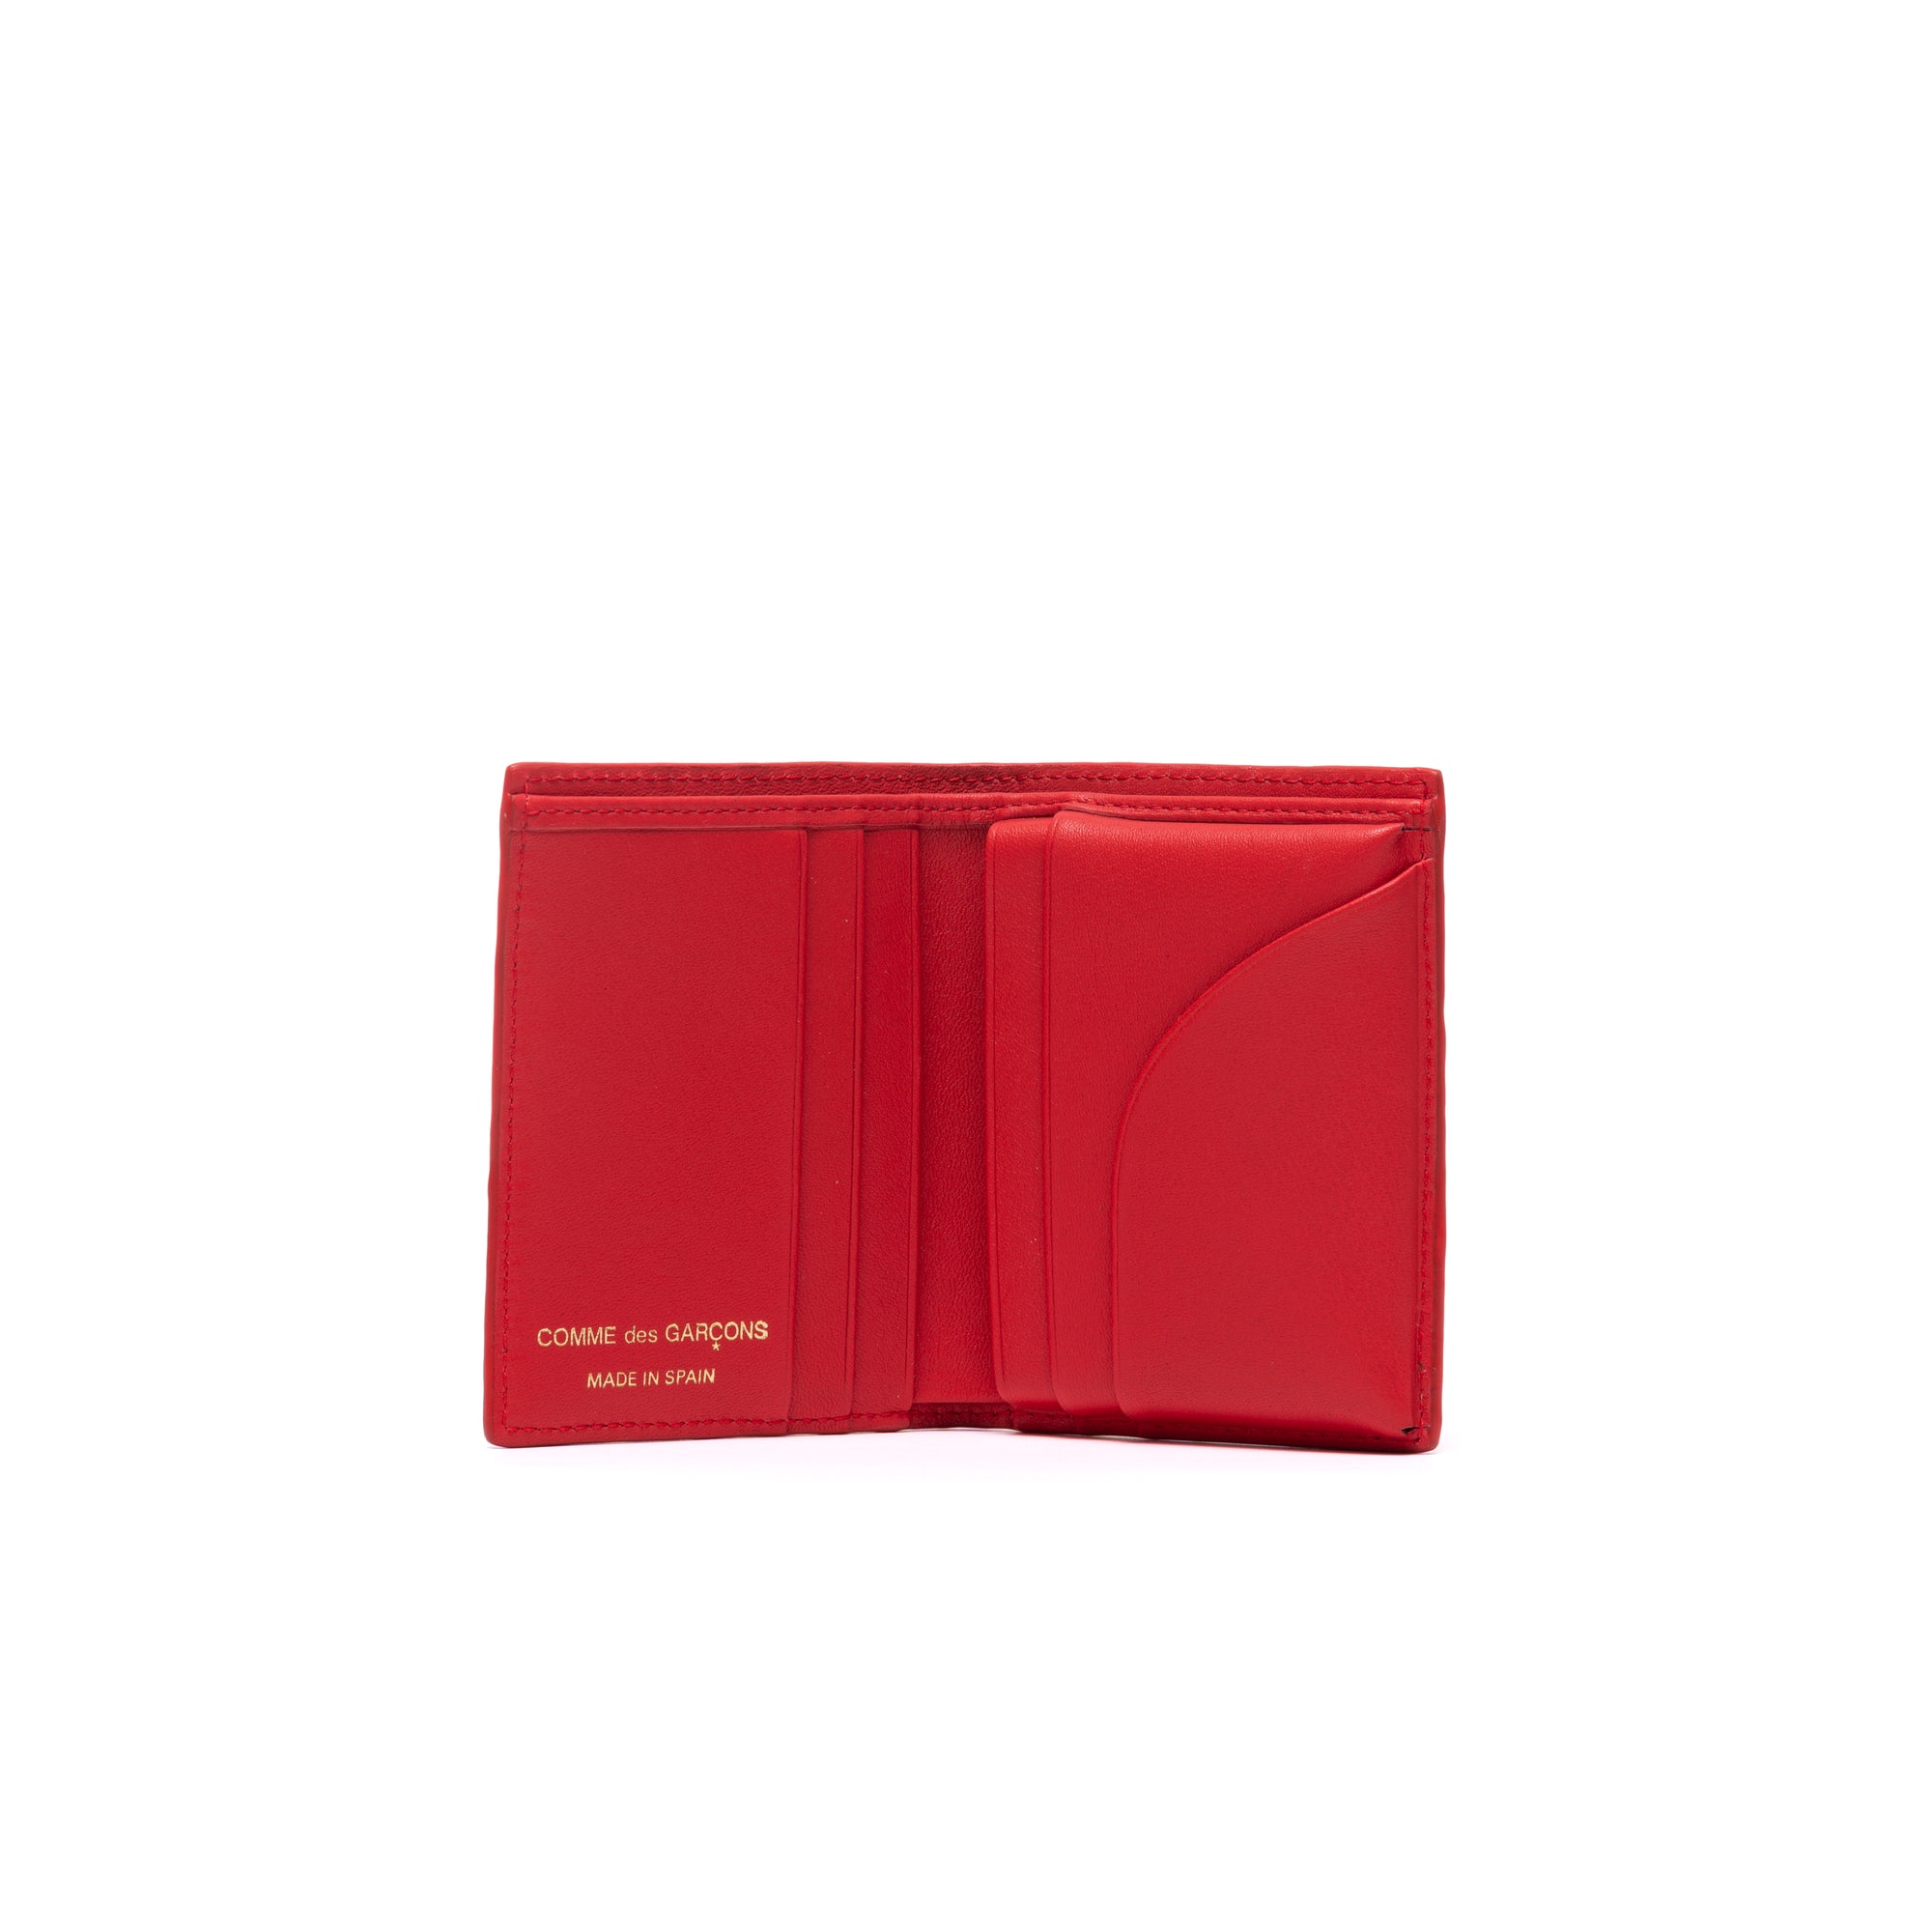 CDG WALLET - Embossed Roots (SA0641ER Red) view 3